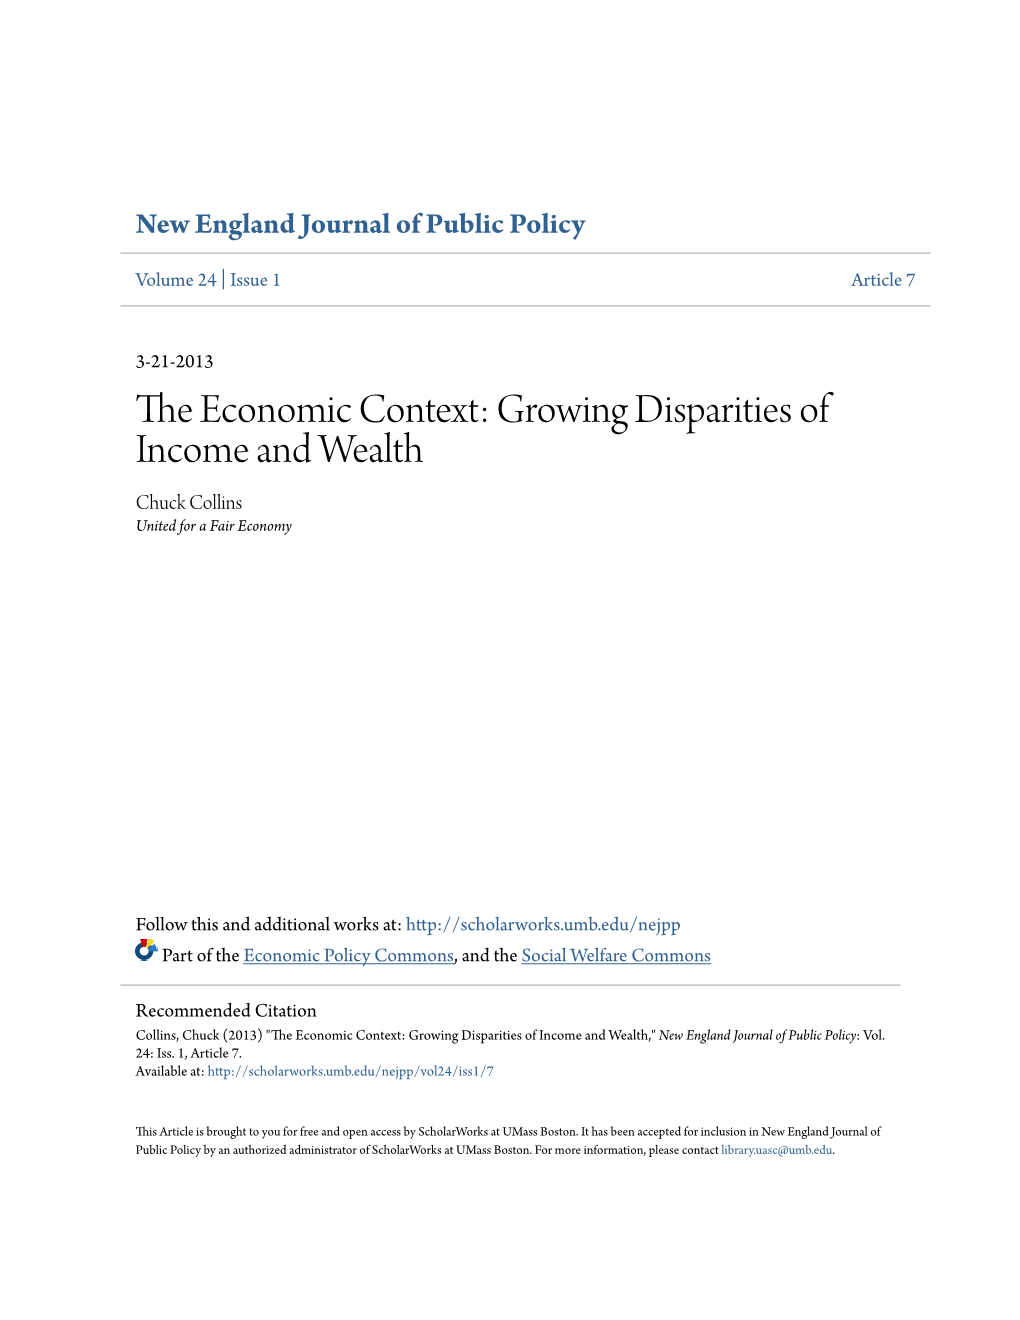 The Economic Context, Growing Disparaties of Income and Wealth